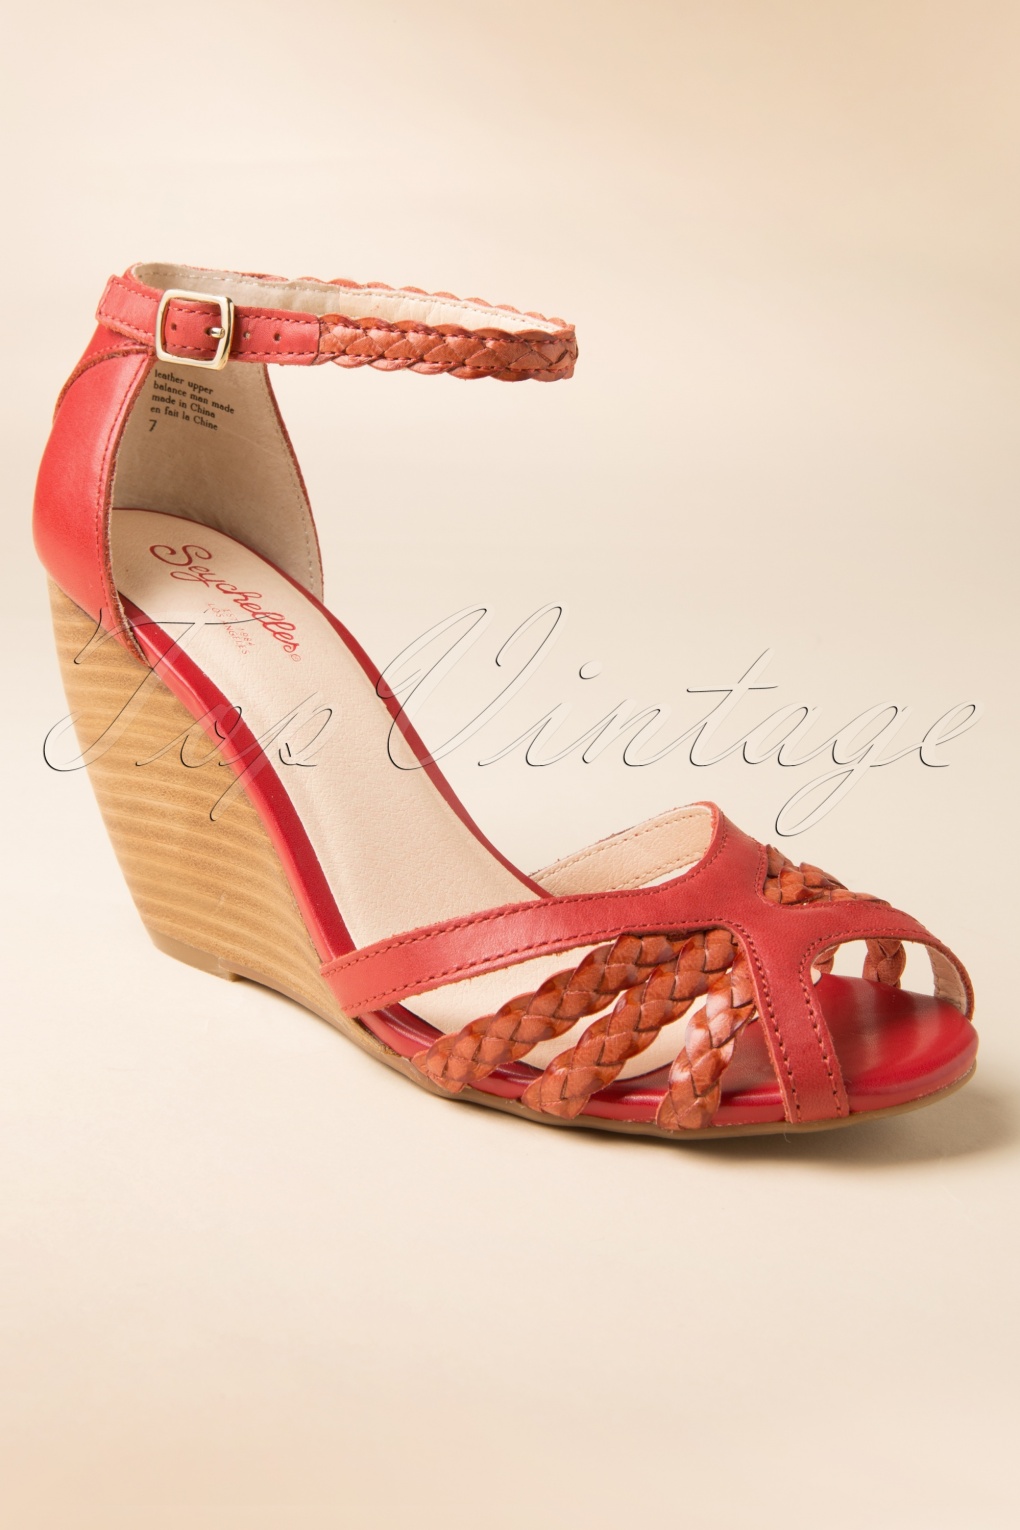 40s Like A Lady Sandals in Red